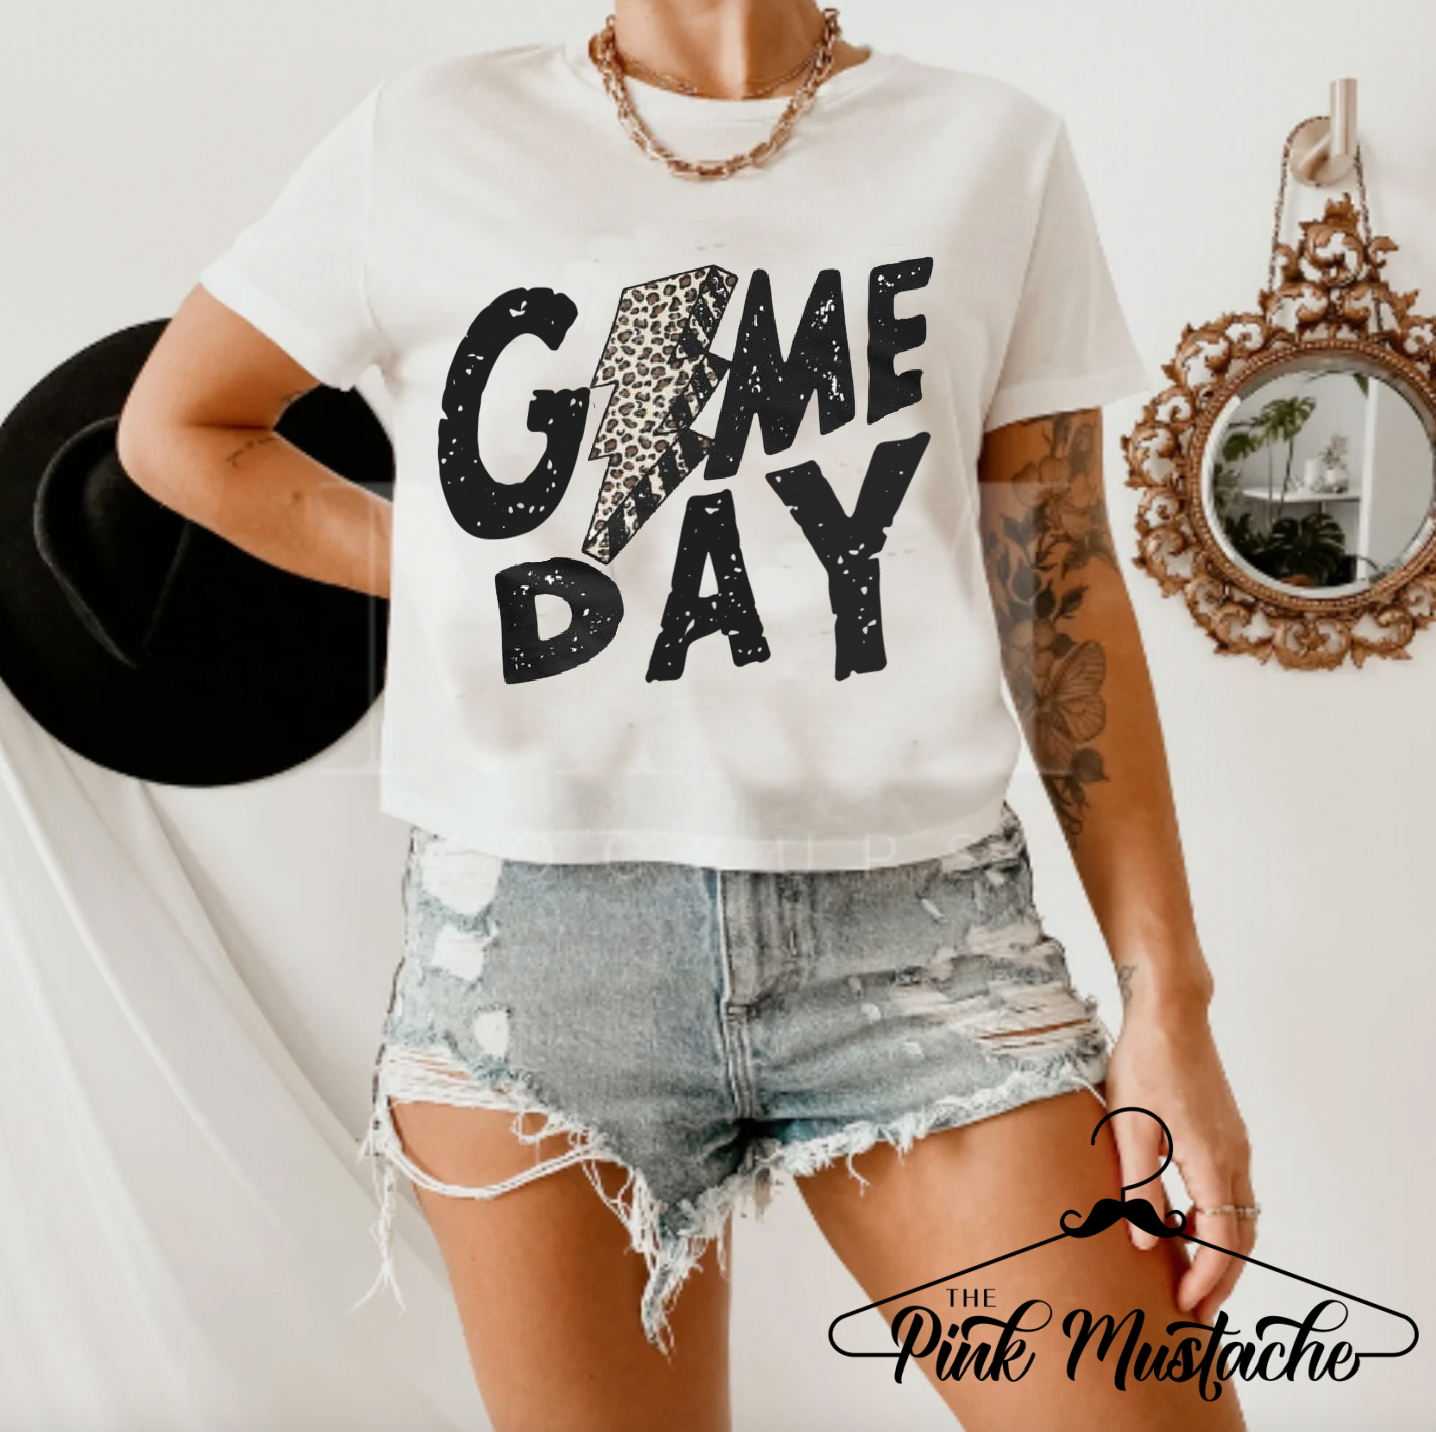 CROPPED Game Day Lightning Bolt Print Tee - Adult Sized Sports Shirt/ Baseball Mom Tee